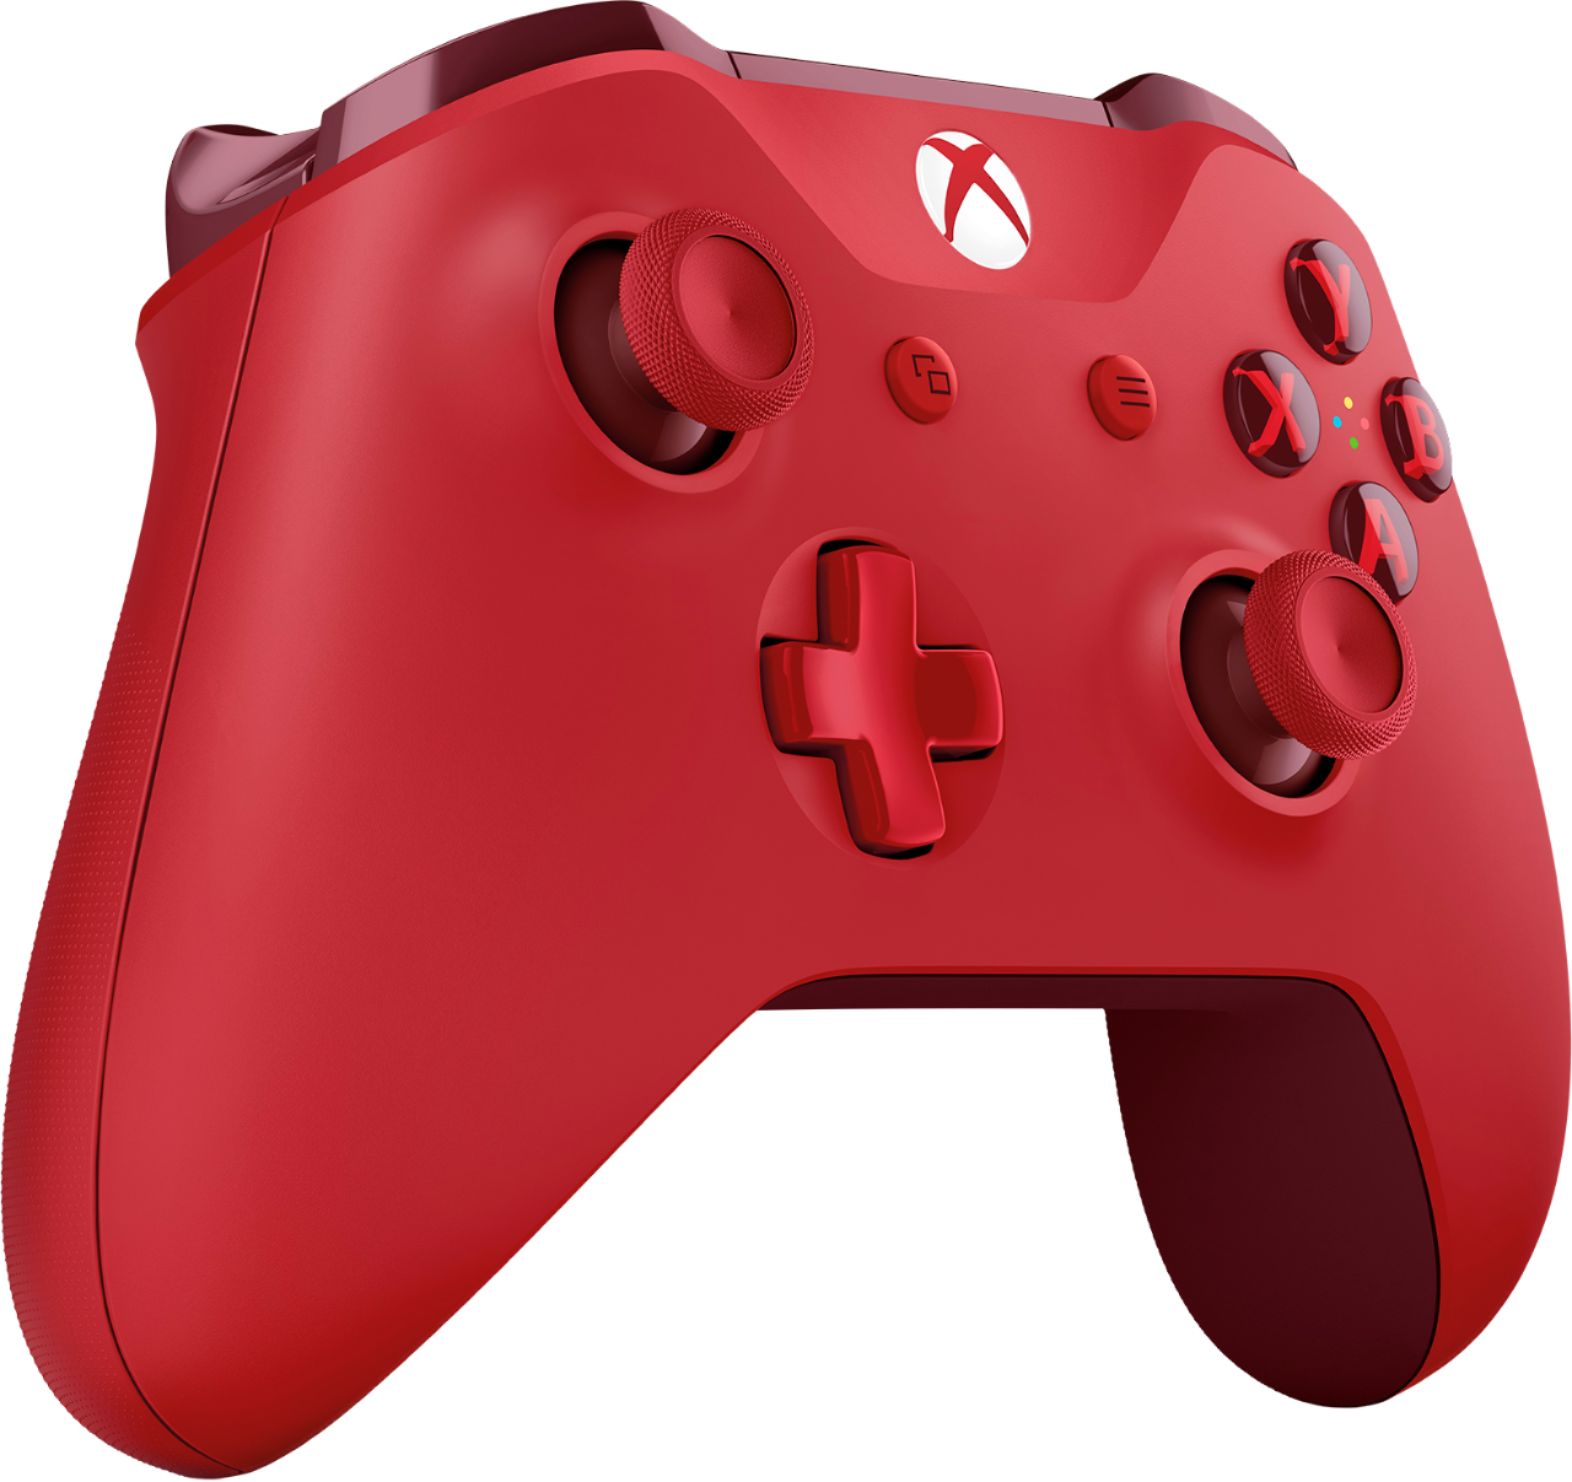 Angle View: Microsoft Xbox Wireless Controller, Red